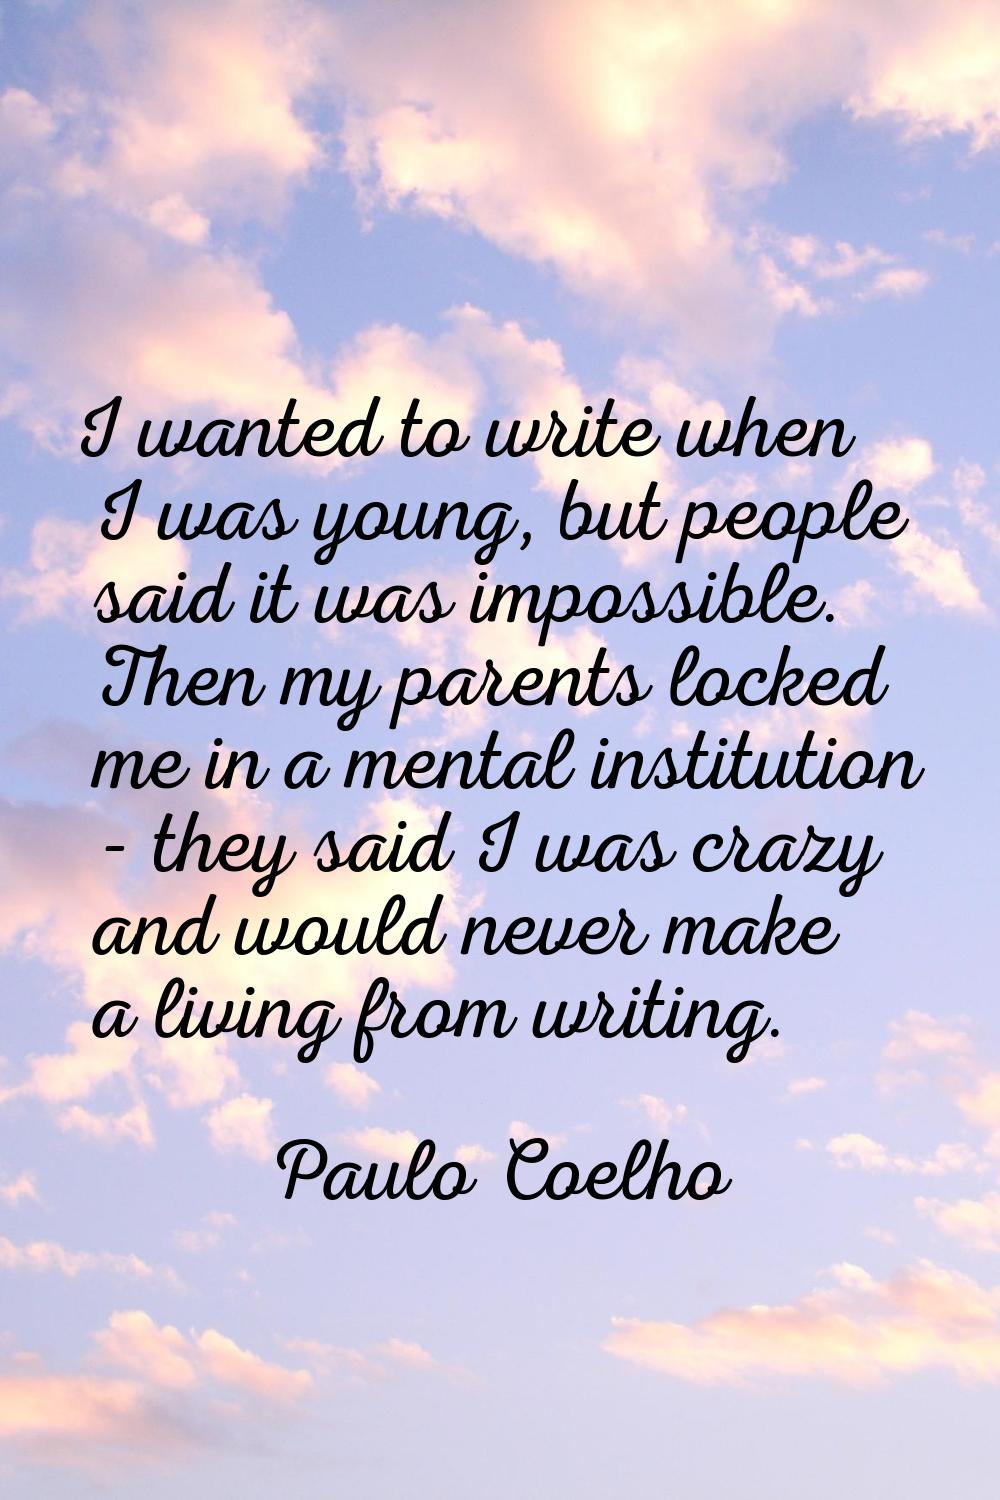 I wanted to write when I was young, but people said it was impossible. Then my parents locked me in